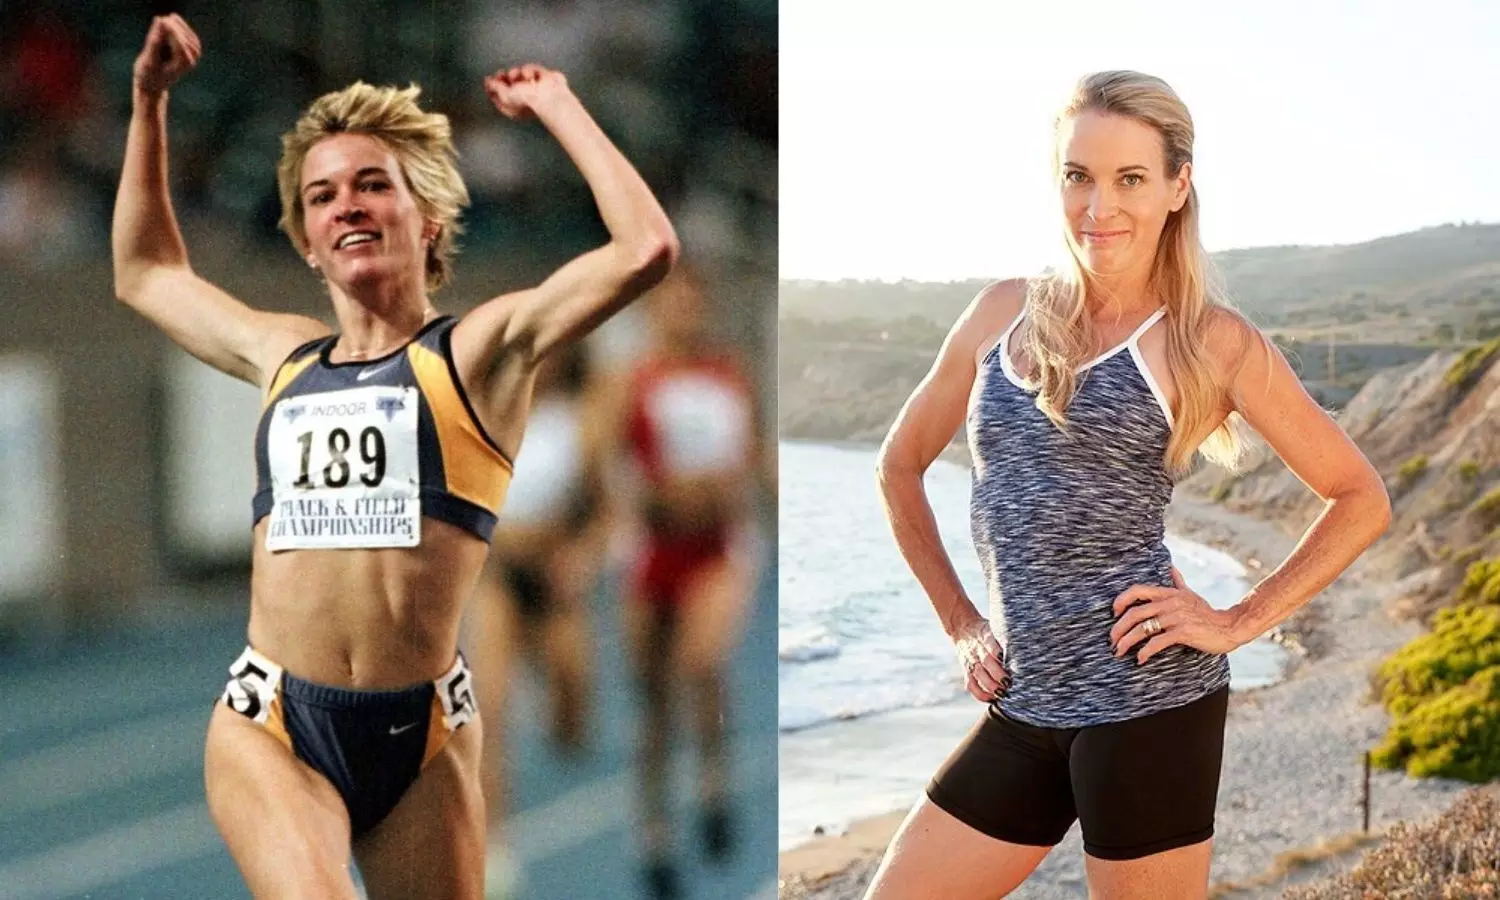 Suzy Hamilton — The story of an Olympics runner who resorted to prostitution